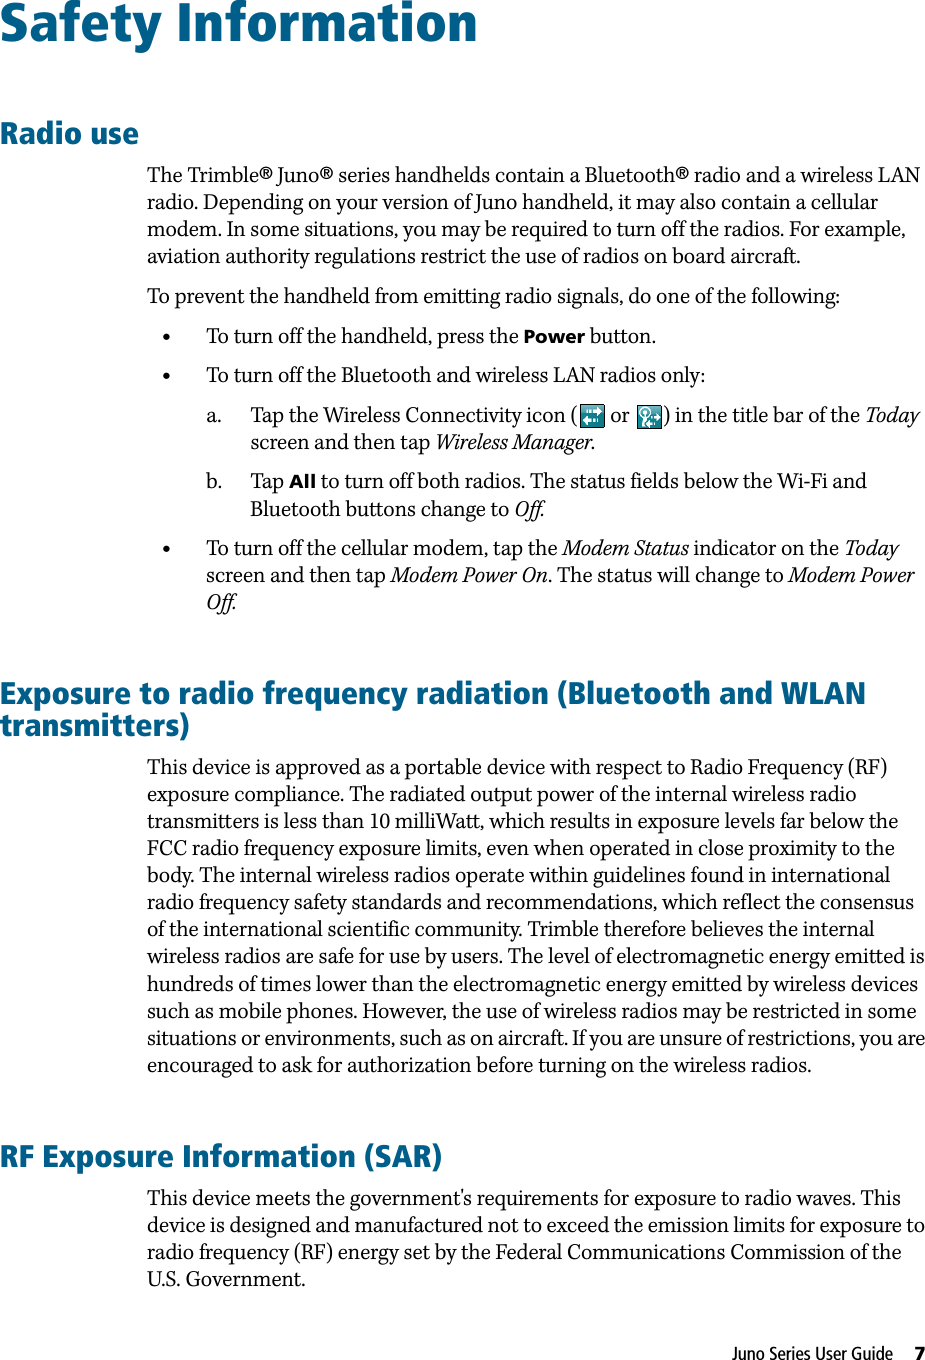 Juno Series User Guide     7Safety InformationRadio useThe Trimble® Juno® series handhelds contain a Bluetooth® radio and a wireless LAN radio. Depending on your version of Juno handheld, it may also contain a cellular modem. In some situations, you may be required to turn off the radios. For example, aviation authority regulations restrict the use of radios on board aircraft. To prevent the handheld from emitting radio signals, do one of the following:•To turn off the handheld, press the Power button. •To turn off the Bluetooth and wireless LAN radios only:a. Tap the Wireless Connectivity icon (  or  ) in the title bar of the Today screen and then tap Wireless Manager. b. Tap All to turn off both radios. The status fields below the Wi-Fi and Bluetooth buttons change to Off.•To turn off the cellular modem, tap the Modem Status indicator on the Today screen and then tap Modem Power On. The status will change to Modem Power Off.Exposure to radio frequency radiation (Bluetooth and WLAN transmitters)This device is approved as a portable device with respect to Radio Frequency (RF) exposure compliance. The radiated output power of the internal wireless radio transmitters is less than 10 milliWatt, which results in exposure levels far below the FCC radio frequency exposure limits, even when operated in close proximity to the body. The internal wireless radios operate within guidelines found in international radio frequency safety standards and recommendations, which reflect the consensus of the international scientific community. Trimble therefore believes the internal wireless radios are safe for use by users. The level of electromagnetic energy emitted is hundreds of times lower than the electromagnetic energy emitted by wireless devices such as mobile phones. However, the use of wireless radios may be restricted in some situations or environments, such as on aircraft. If you are unsure of restrictions, you are encouraged to ask for authorization before turning on the wireless radios.RF Exposure Information (SAR)This device meets the government&apos;s requirements for exposure to radio waves. This device is designed and manufactured not to exceed the emission limits for exposure to radio frequency (RF) energy set by the Federal Communications Commission of the U.S. Government.